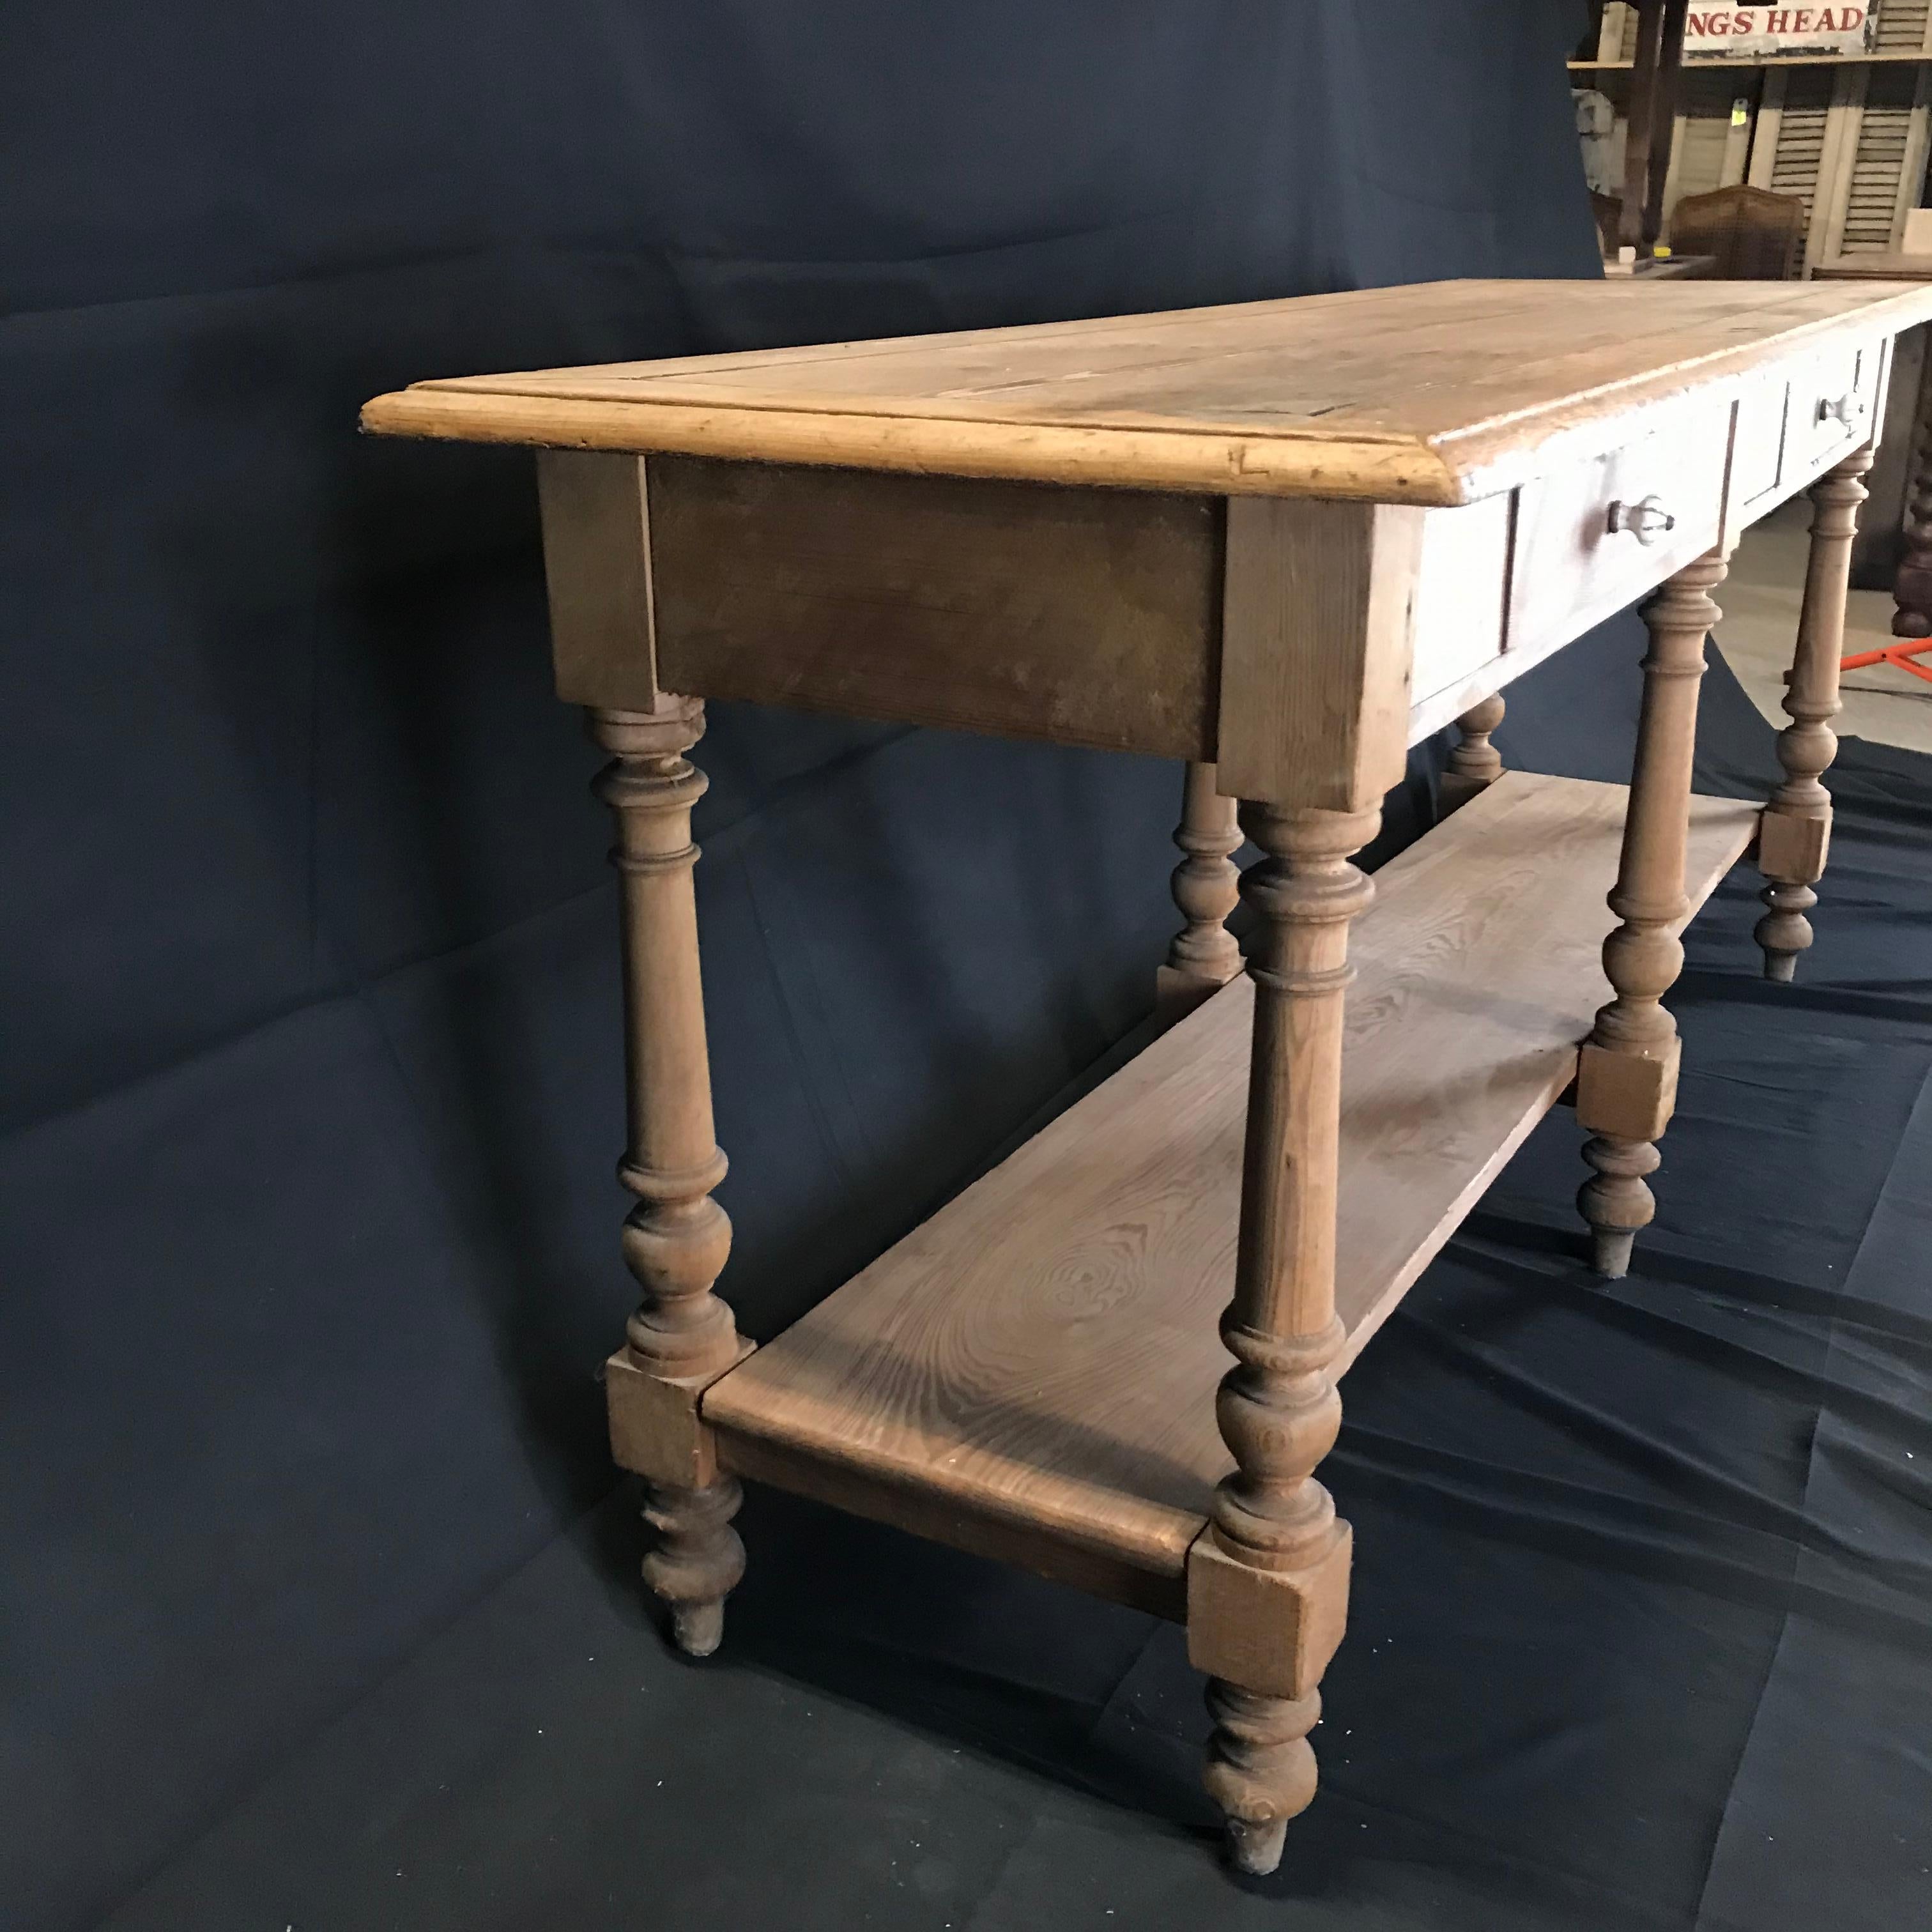 A versatile long narrow rustic French scrubbed pine sofa table, sideboard or credenza with antique ceramic pulls, circa mid-late 1800s. Measures: Skirt 26.25”
#4734.
       